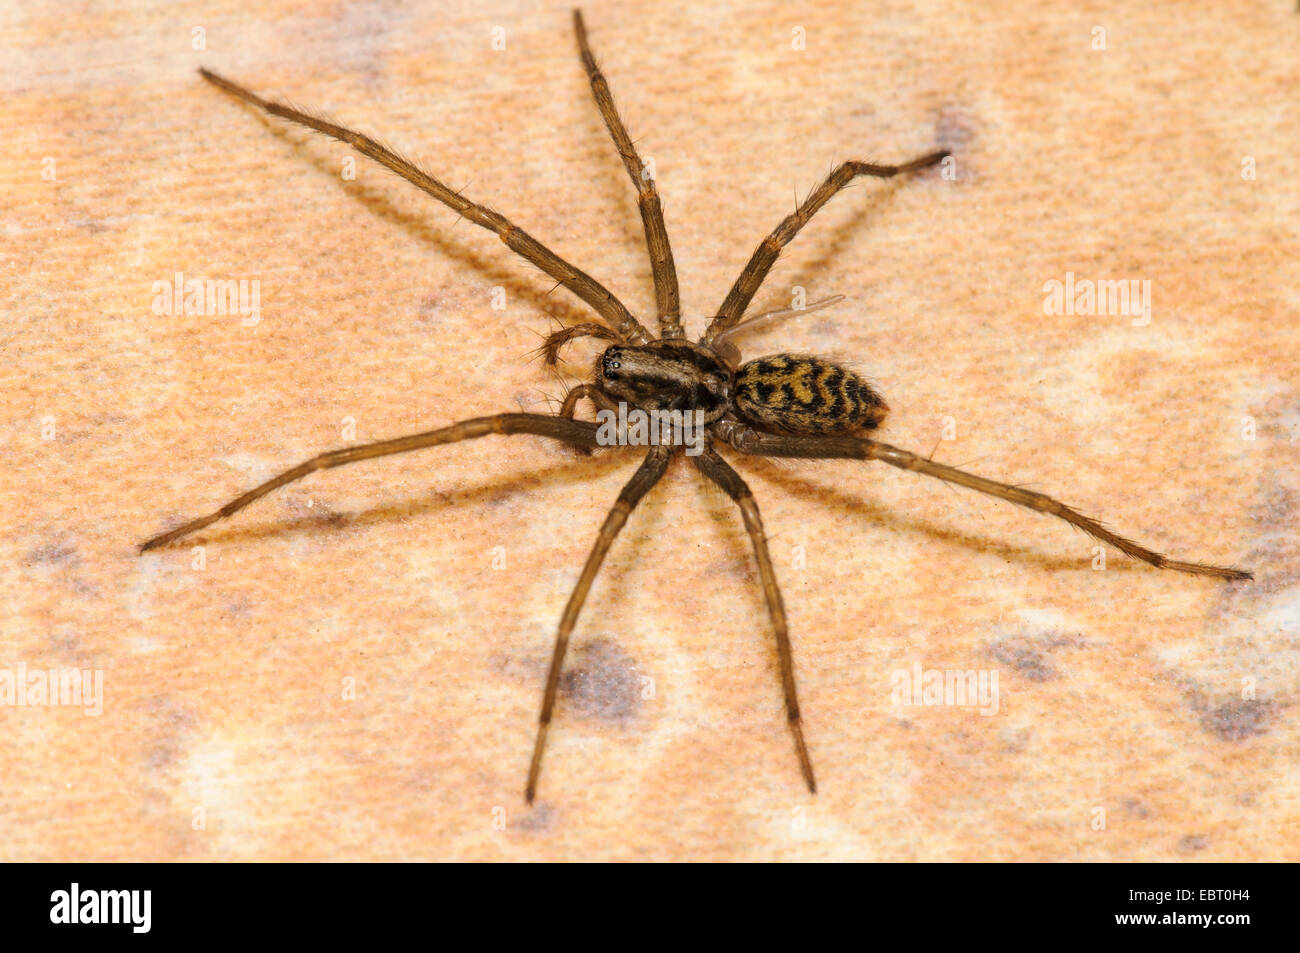 House spider (Eratigena atrica) adult female in the process of regrowing her right rear leg, on a tile floor in a house in Thirs Stock Photo